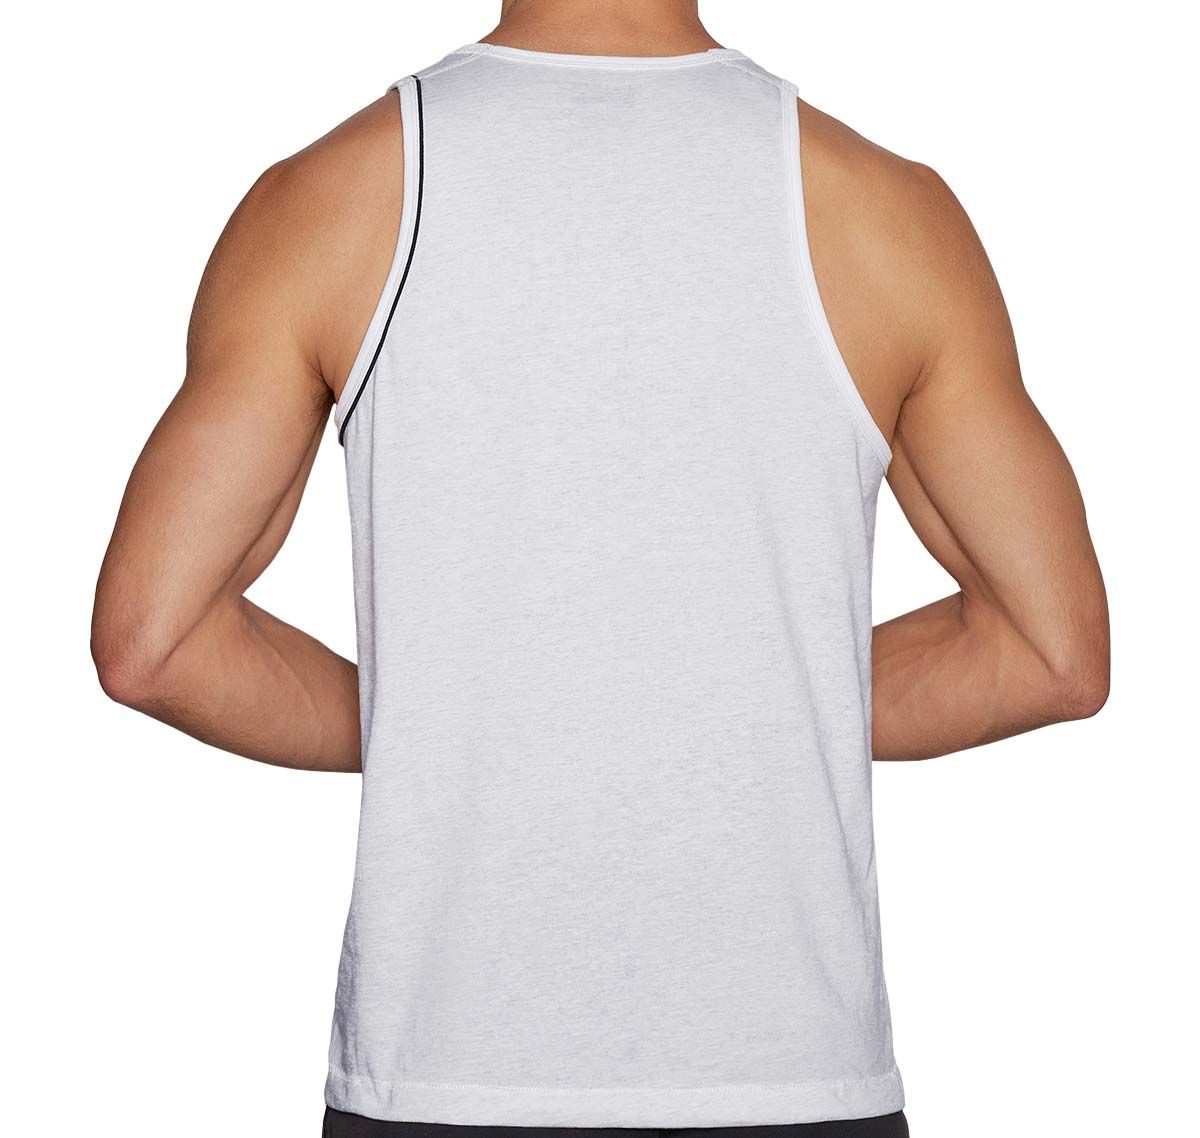 C-IN2 Tank Top HAND ME DOWN RELAXED TANK WINTER WHITE 1926F-105, white